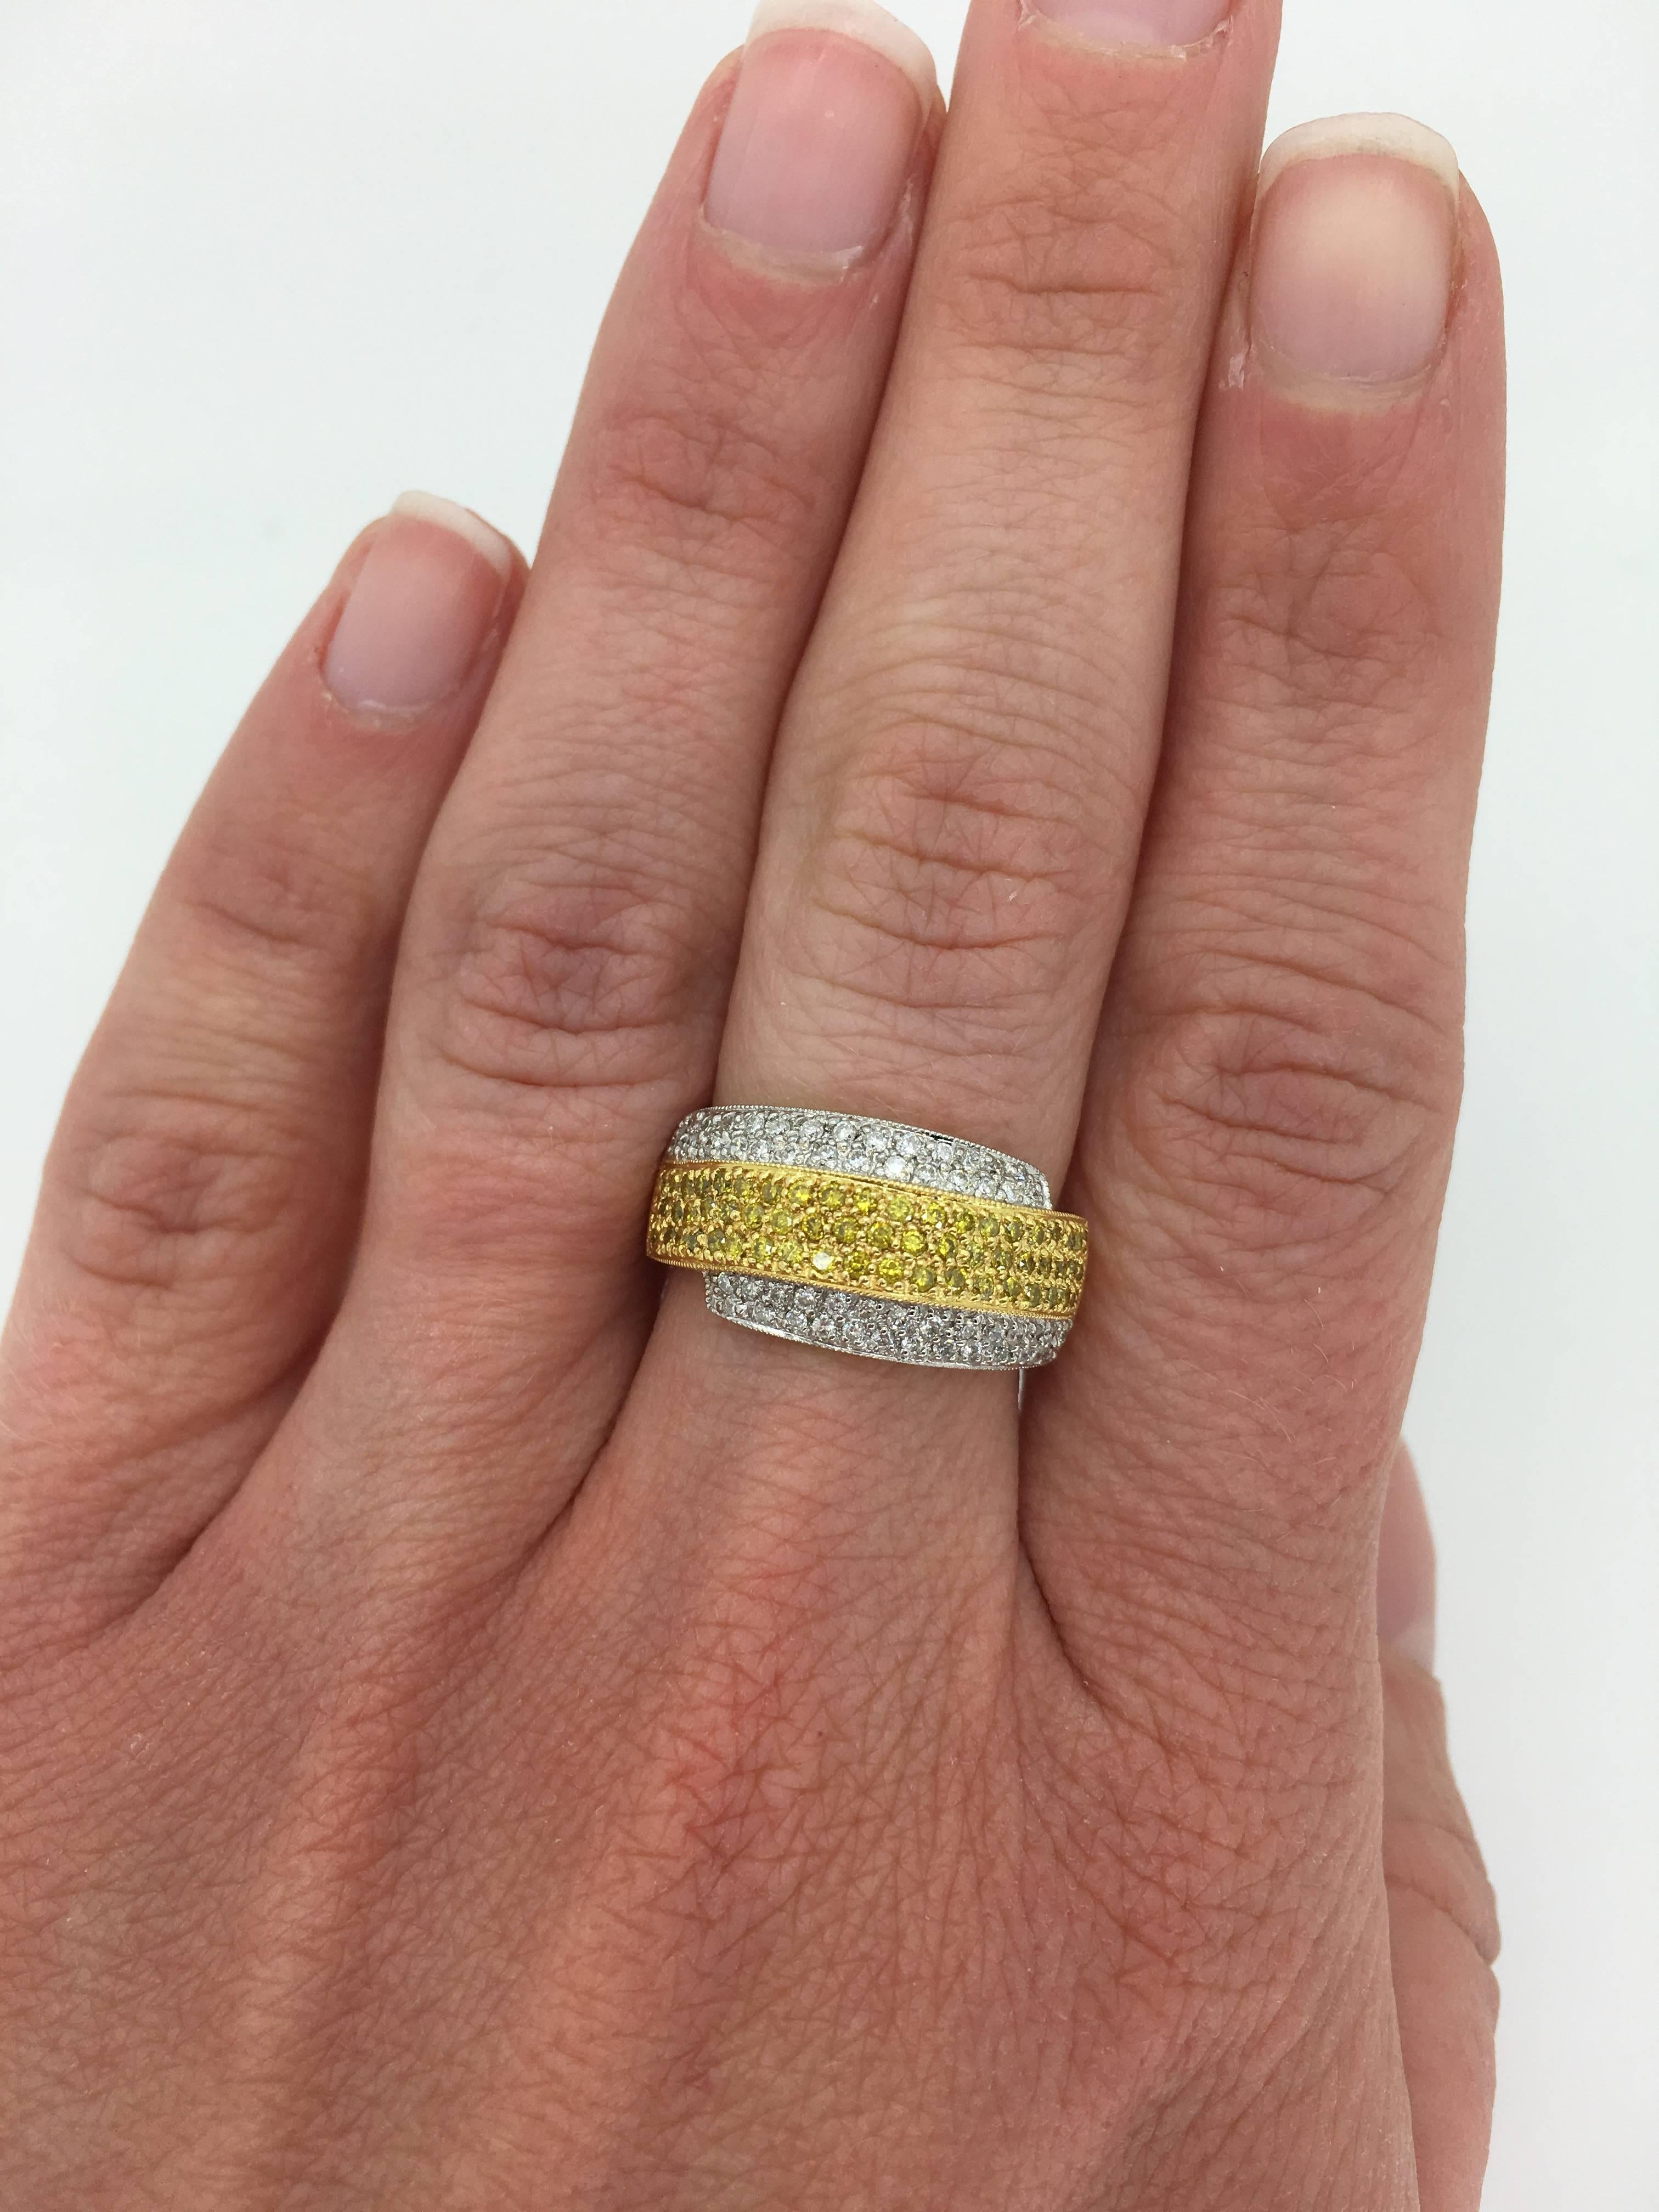 Unique 18k two-tone diamond ring featuring white and yellow diamonds. 

This Unique Two Tone Diamond Ring Is Adorned with Yellow and White Diamonds Set in a Two Tone 18K Gold.

Diamond Carat Weight: Approximately 1.10CTW
Diamond Cut: 113 Round